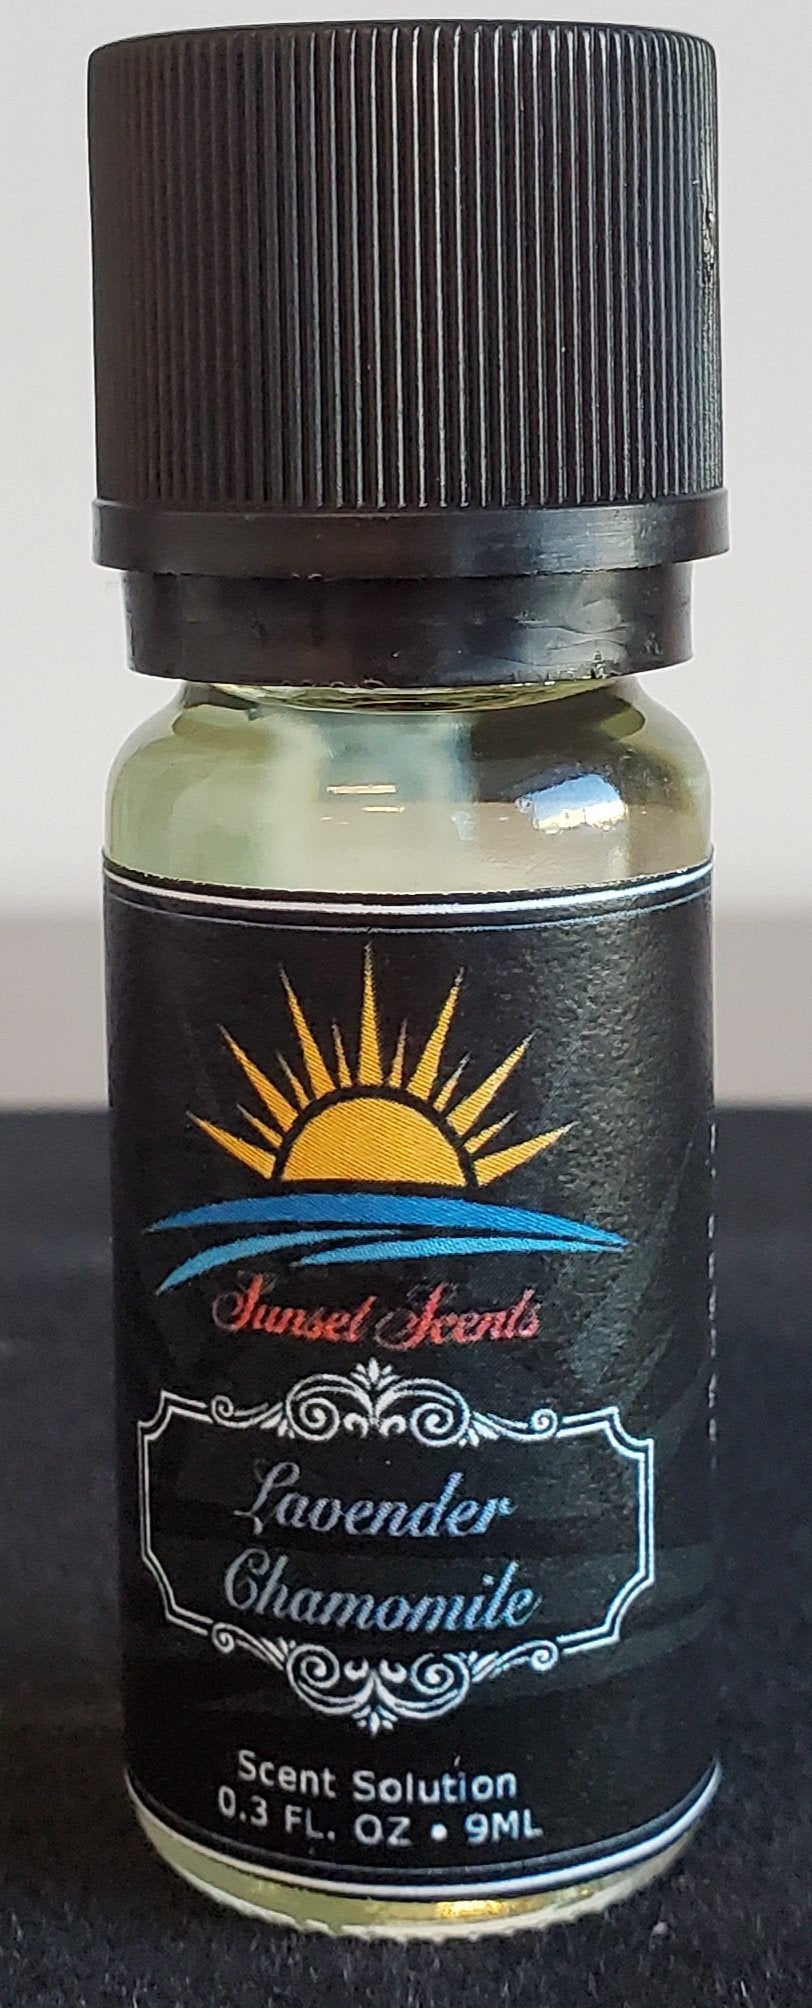 Scent Solutions  Home Fragrance Oil – Sunset Canyon Candles